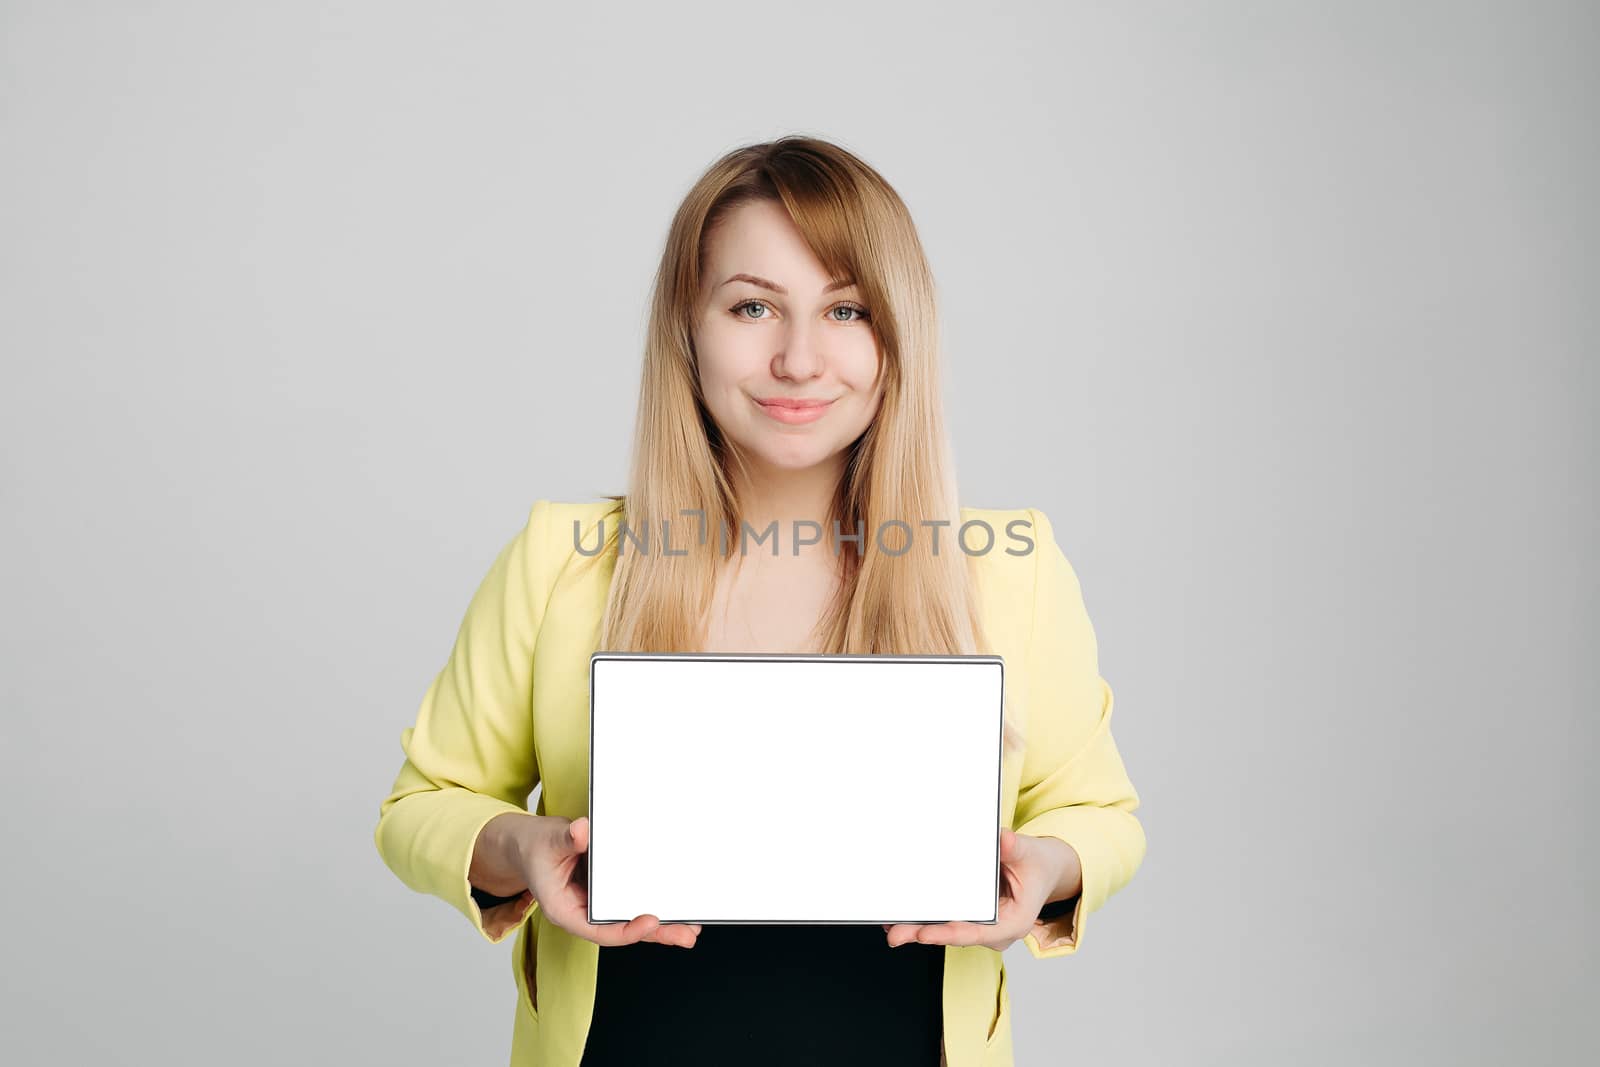 Portrait of blonde haired woman, wearing in yellow jacket and black blouse, holding tablet computer and showing at camera. Positivity girl posing against gray studio background. Concept of business.